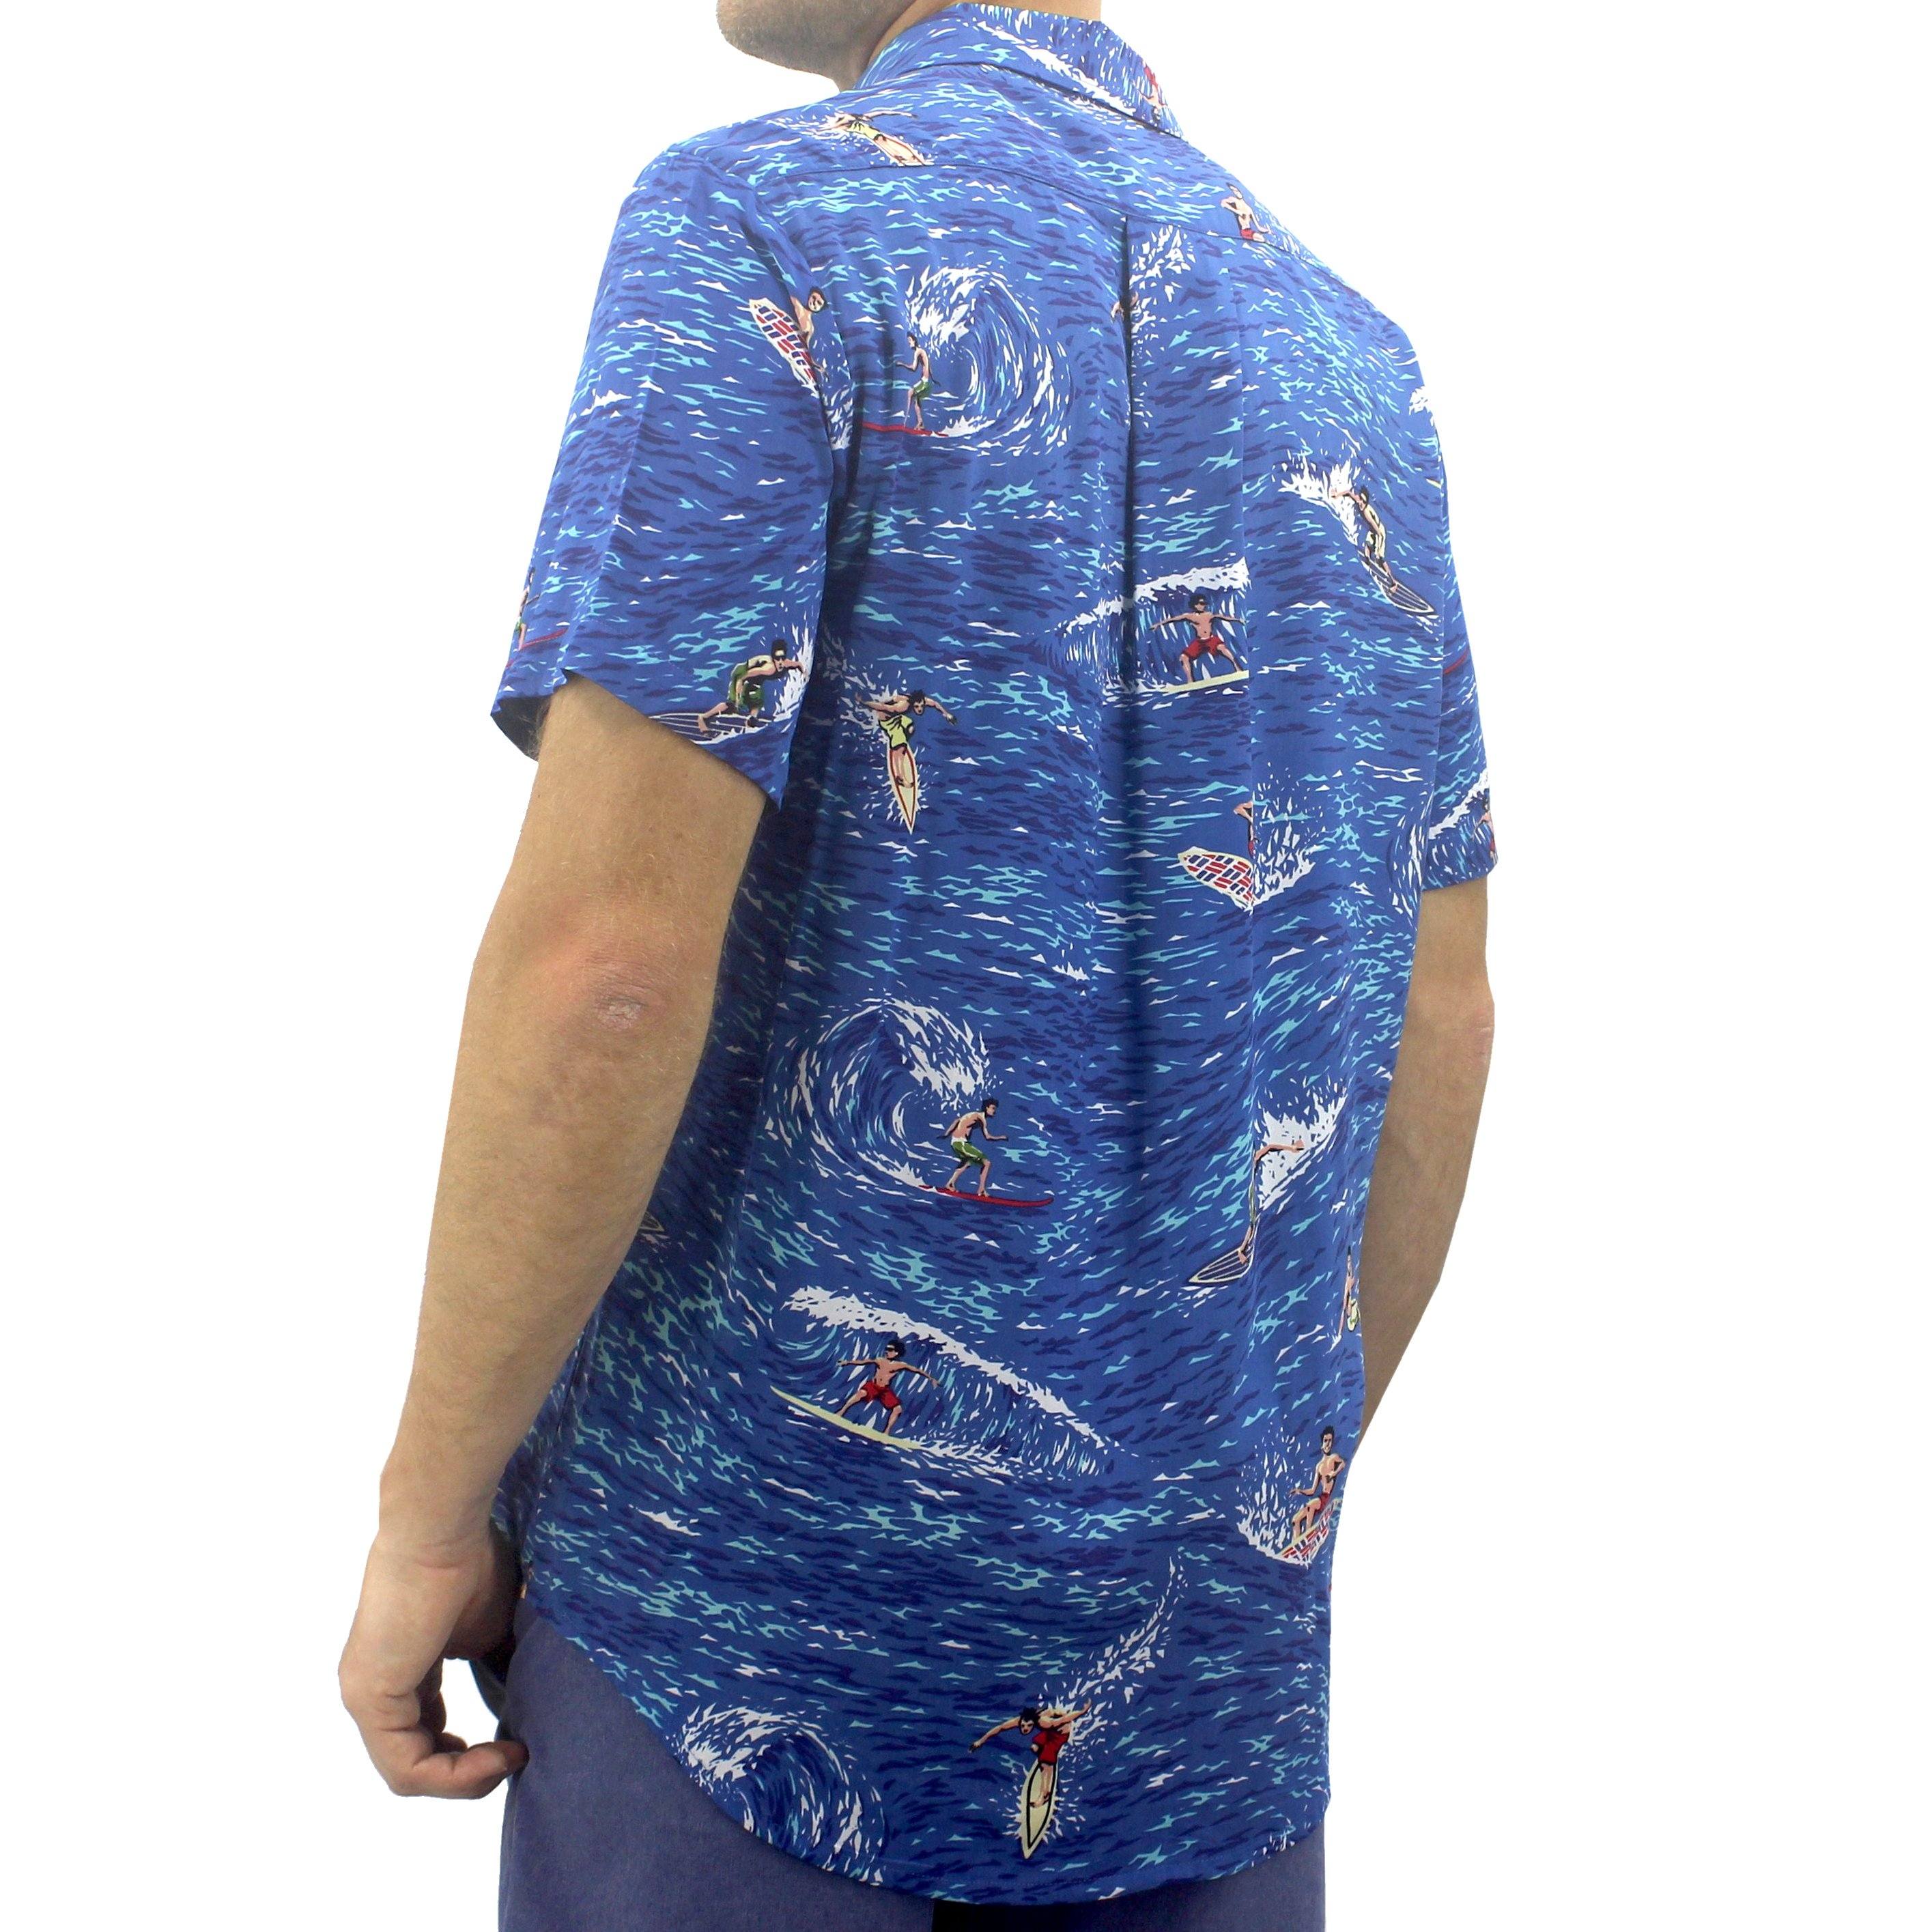 Surfer Patterned Cotton Summer Short Sleeve Button Up Shirts